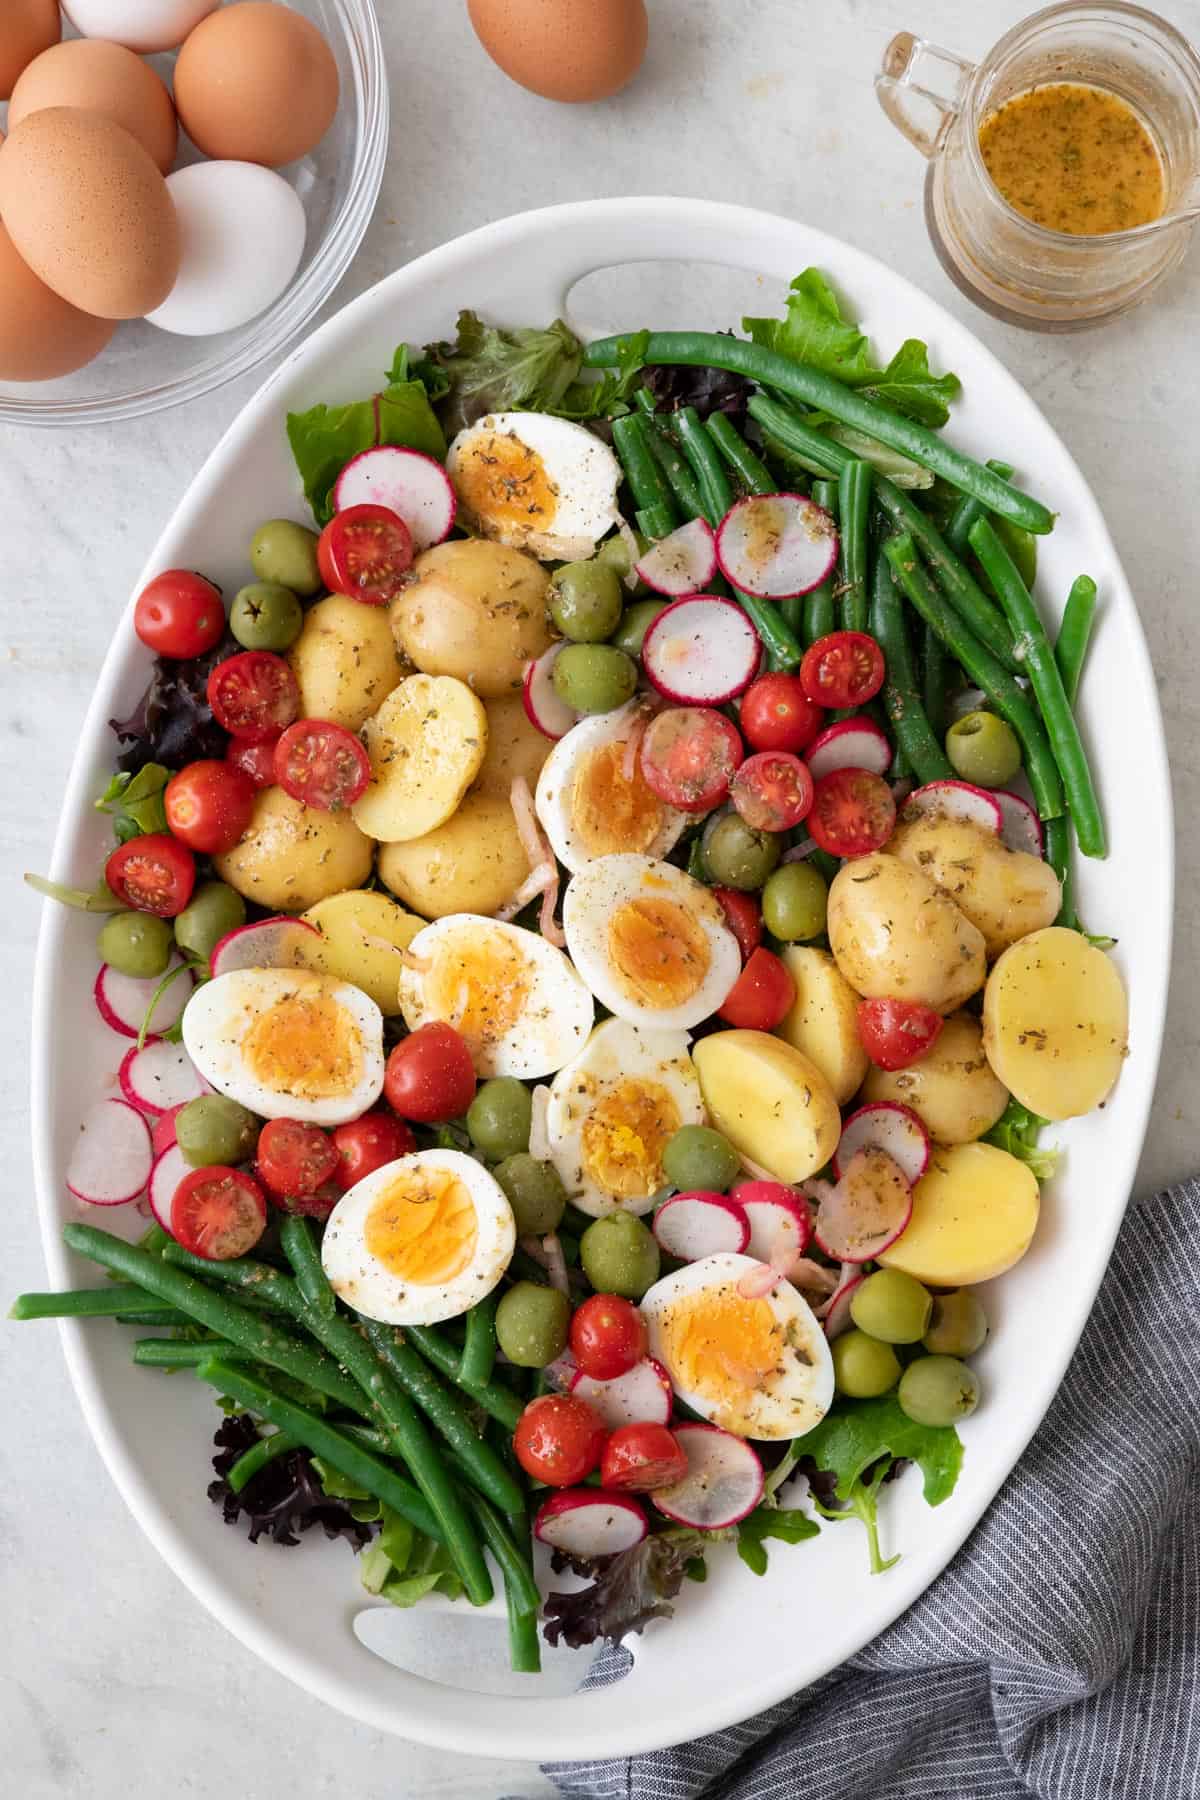 Nicoise salad ingredients layered on a large oval platter with a bowl of fresh eggs and dressing nearby.